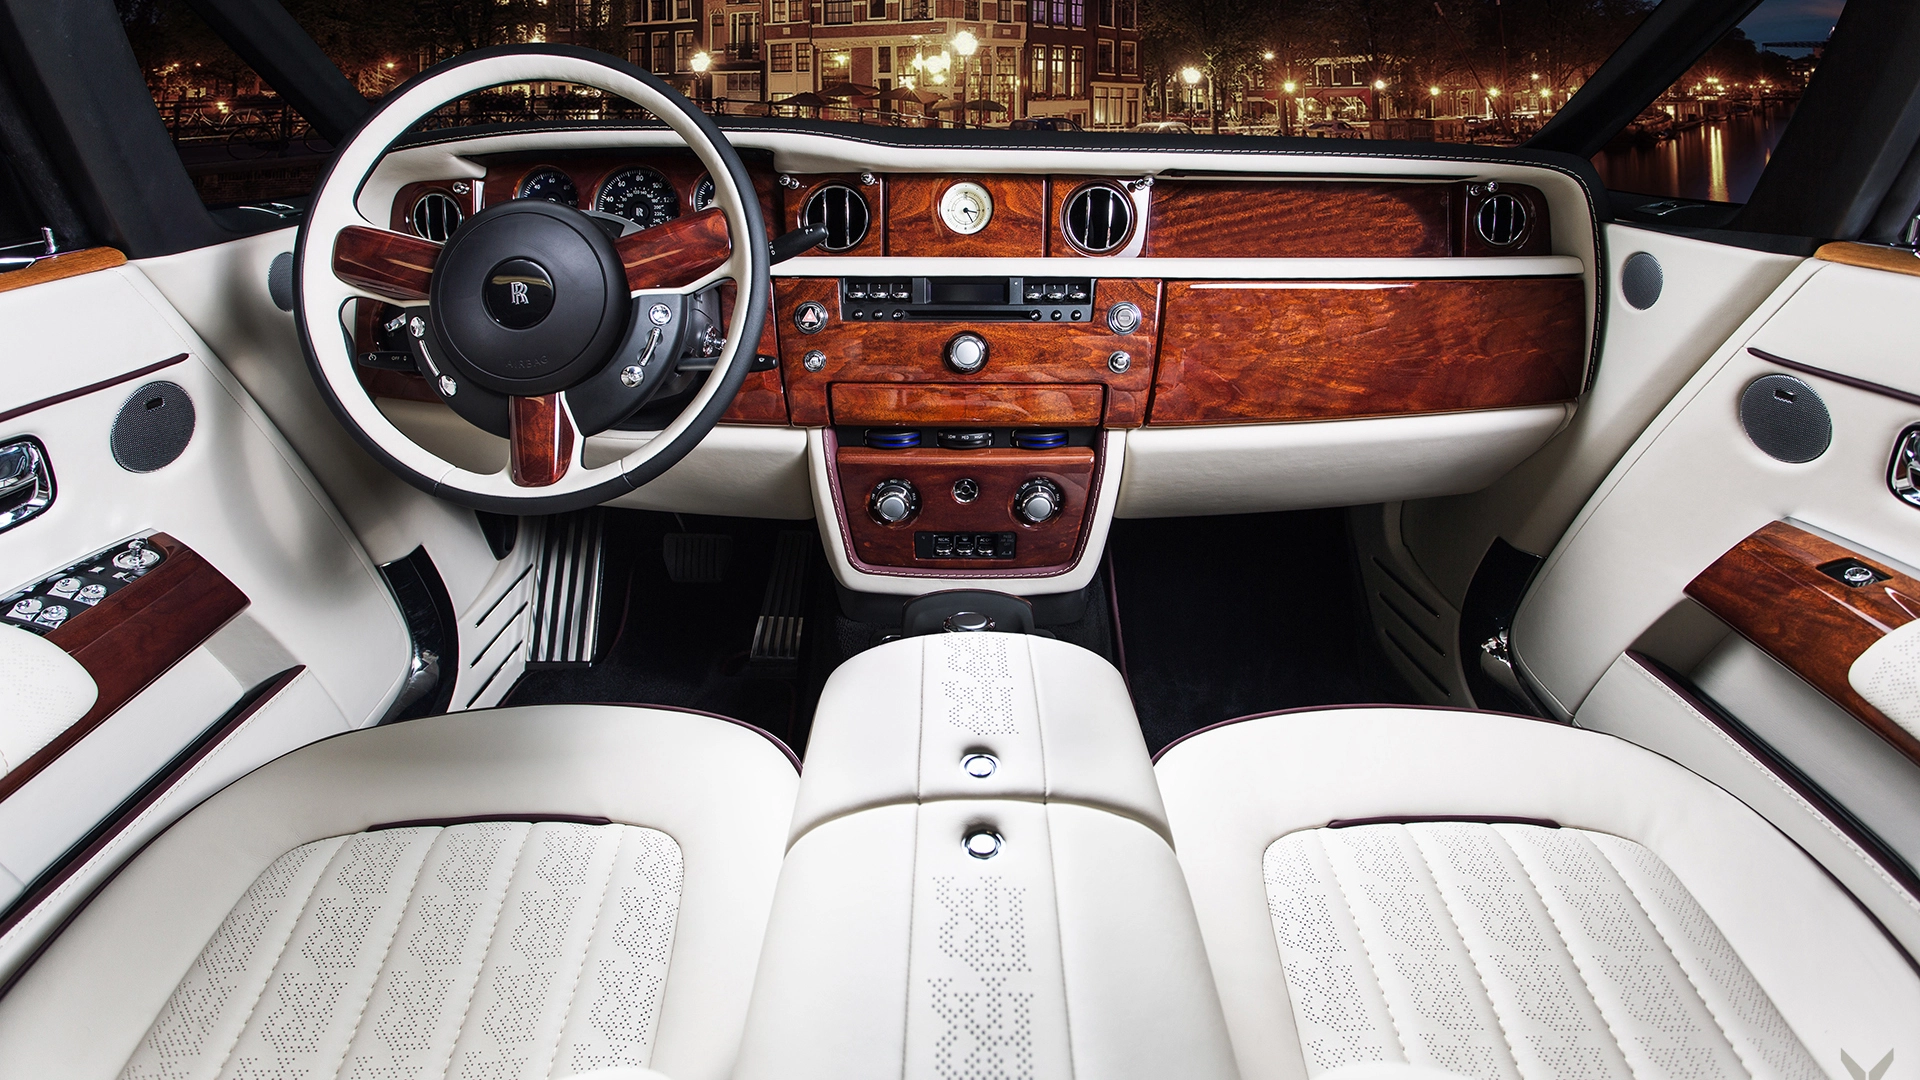 What is the Average Price of a Rolls-Royce?